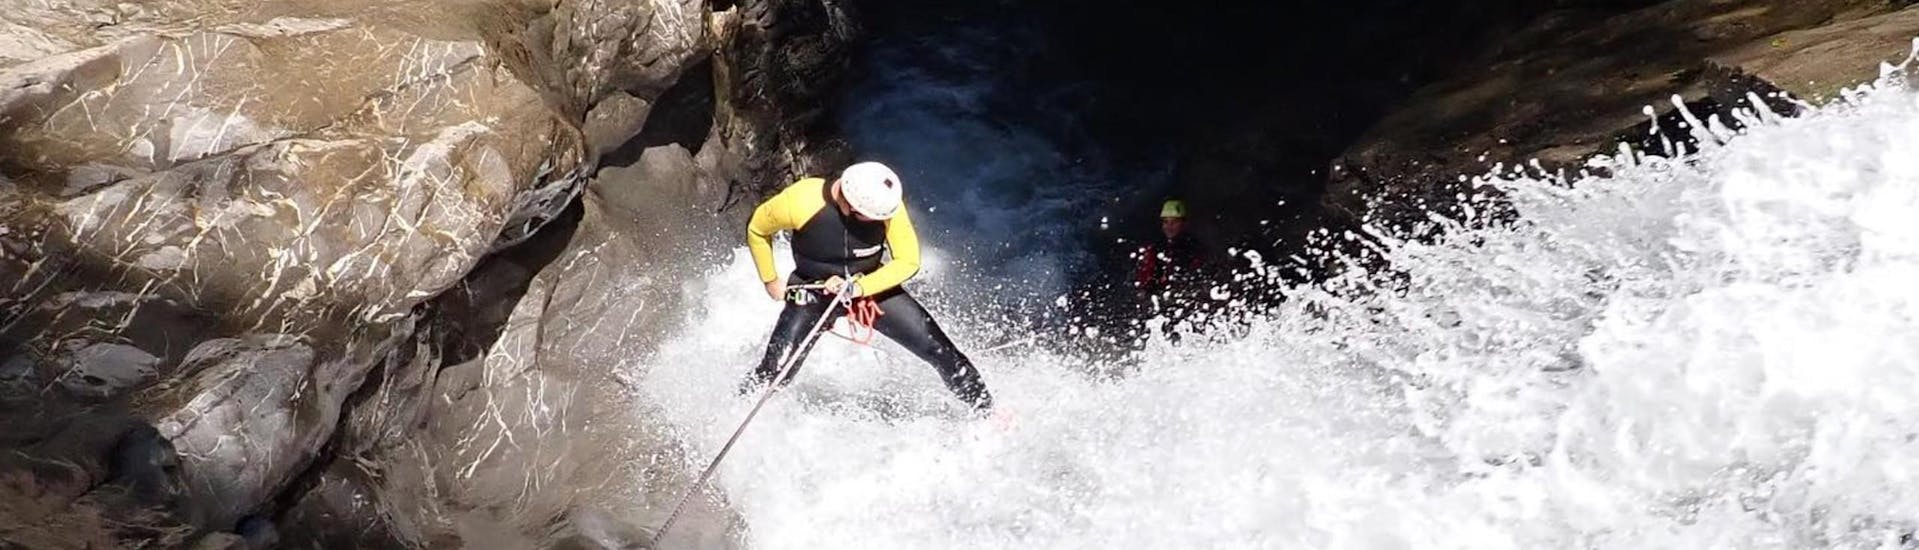 A man is abseiling down a roaring waterfall as he makes his way through the ravine on the tour Canyoning in Schwarzwasserbach for Experienced Canyoneers with canyoning erleben.